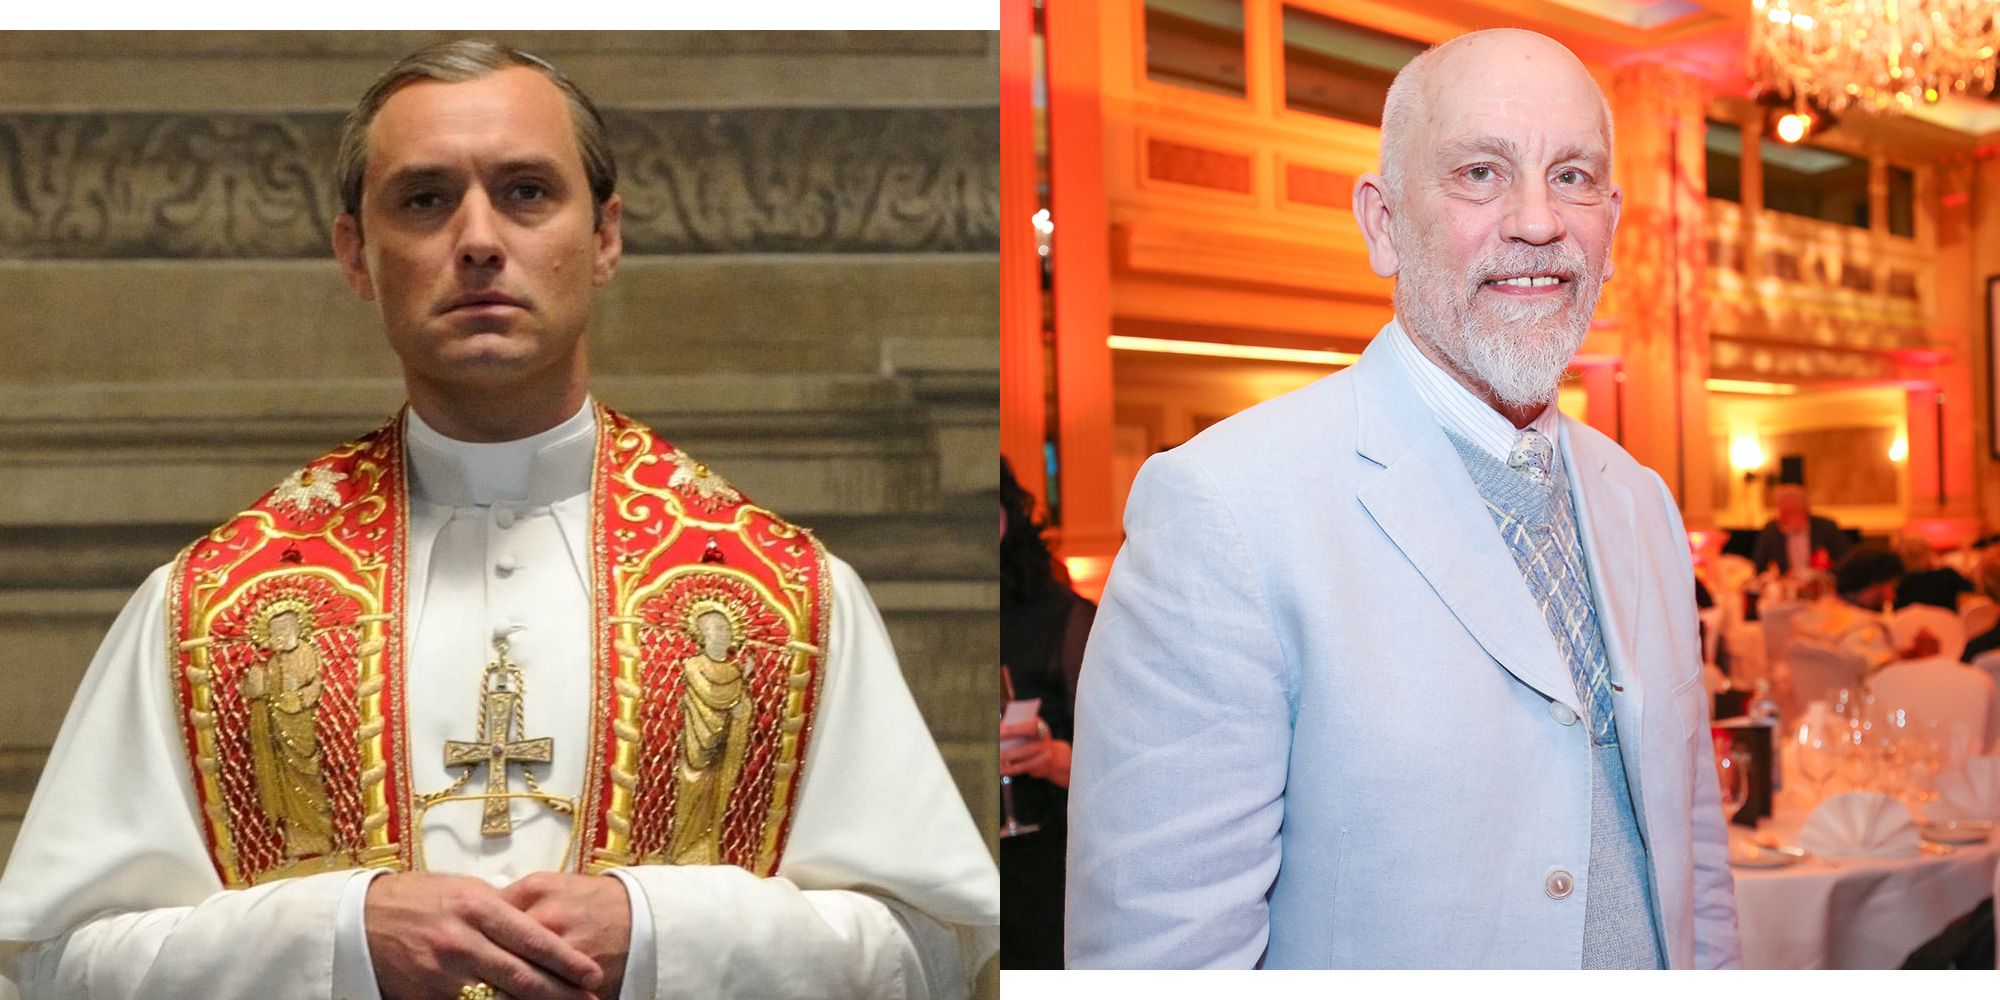 binde Ride sokker The Young Pope Season 2 - Jude Law and John Malkovich Will Star in The New  Pope